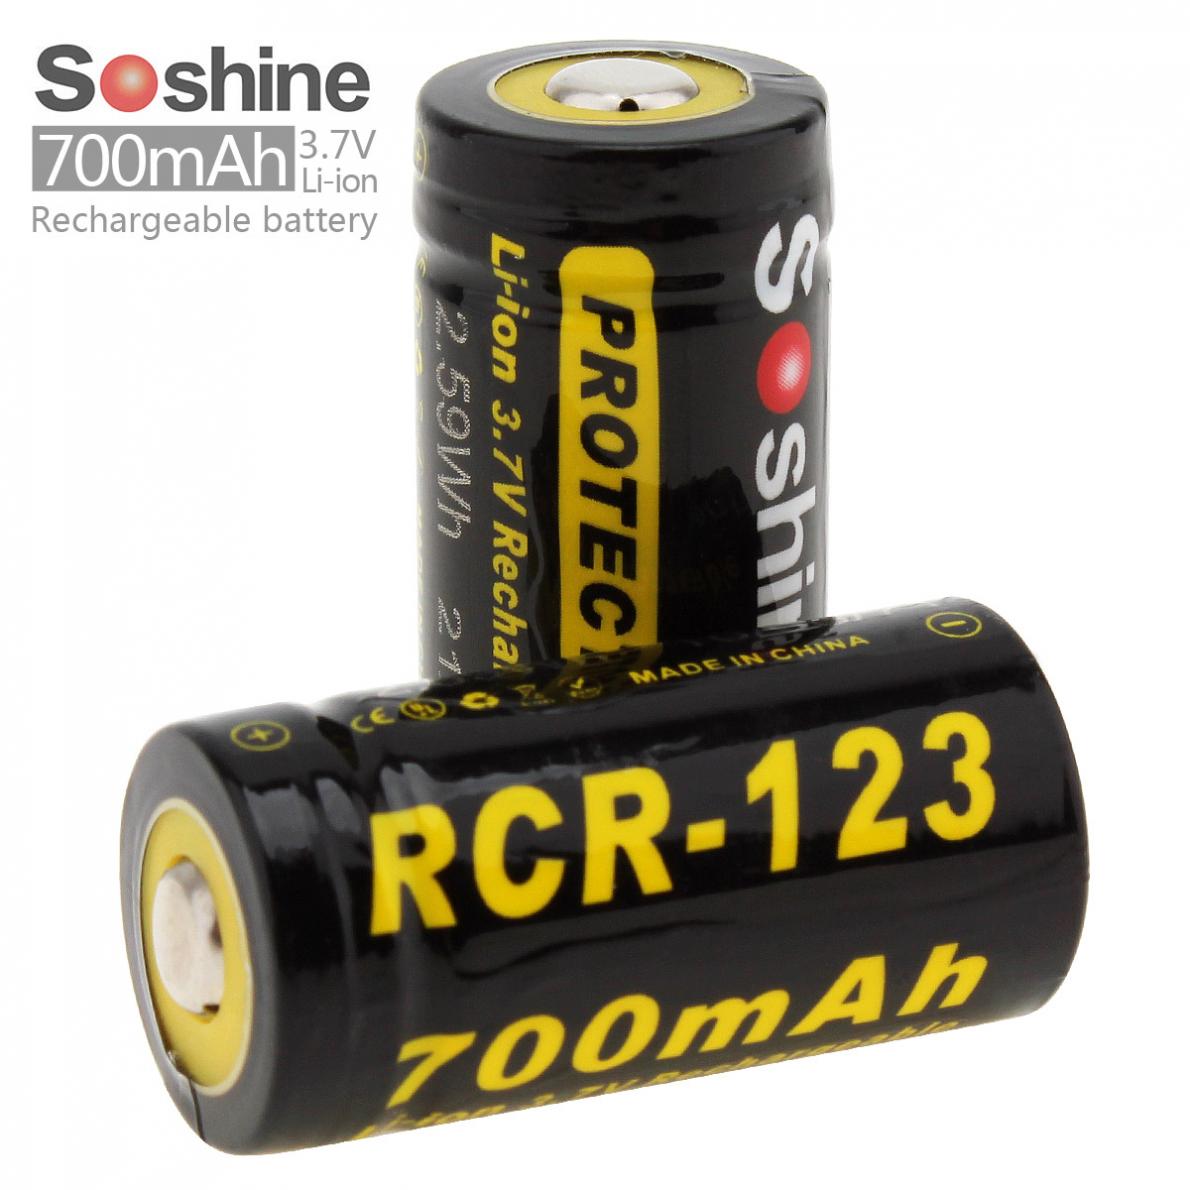 silke træk uld over øjnene effektivt 5 Pairs Soshine Li-ion RCR 123 3.7V 16340 700mAh Protected Rechargeable  Lithium Battery with Battery Case - Price history & Review | AliExpress  Seller - DiGiWay Store | Alitools.io